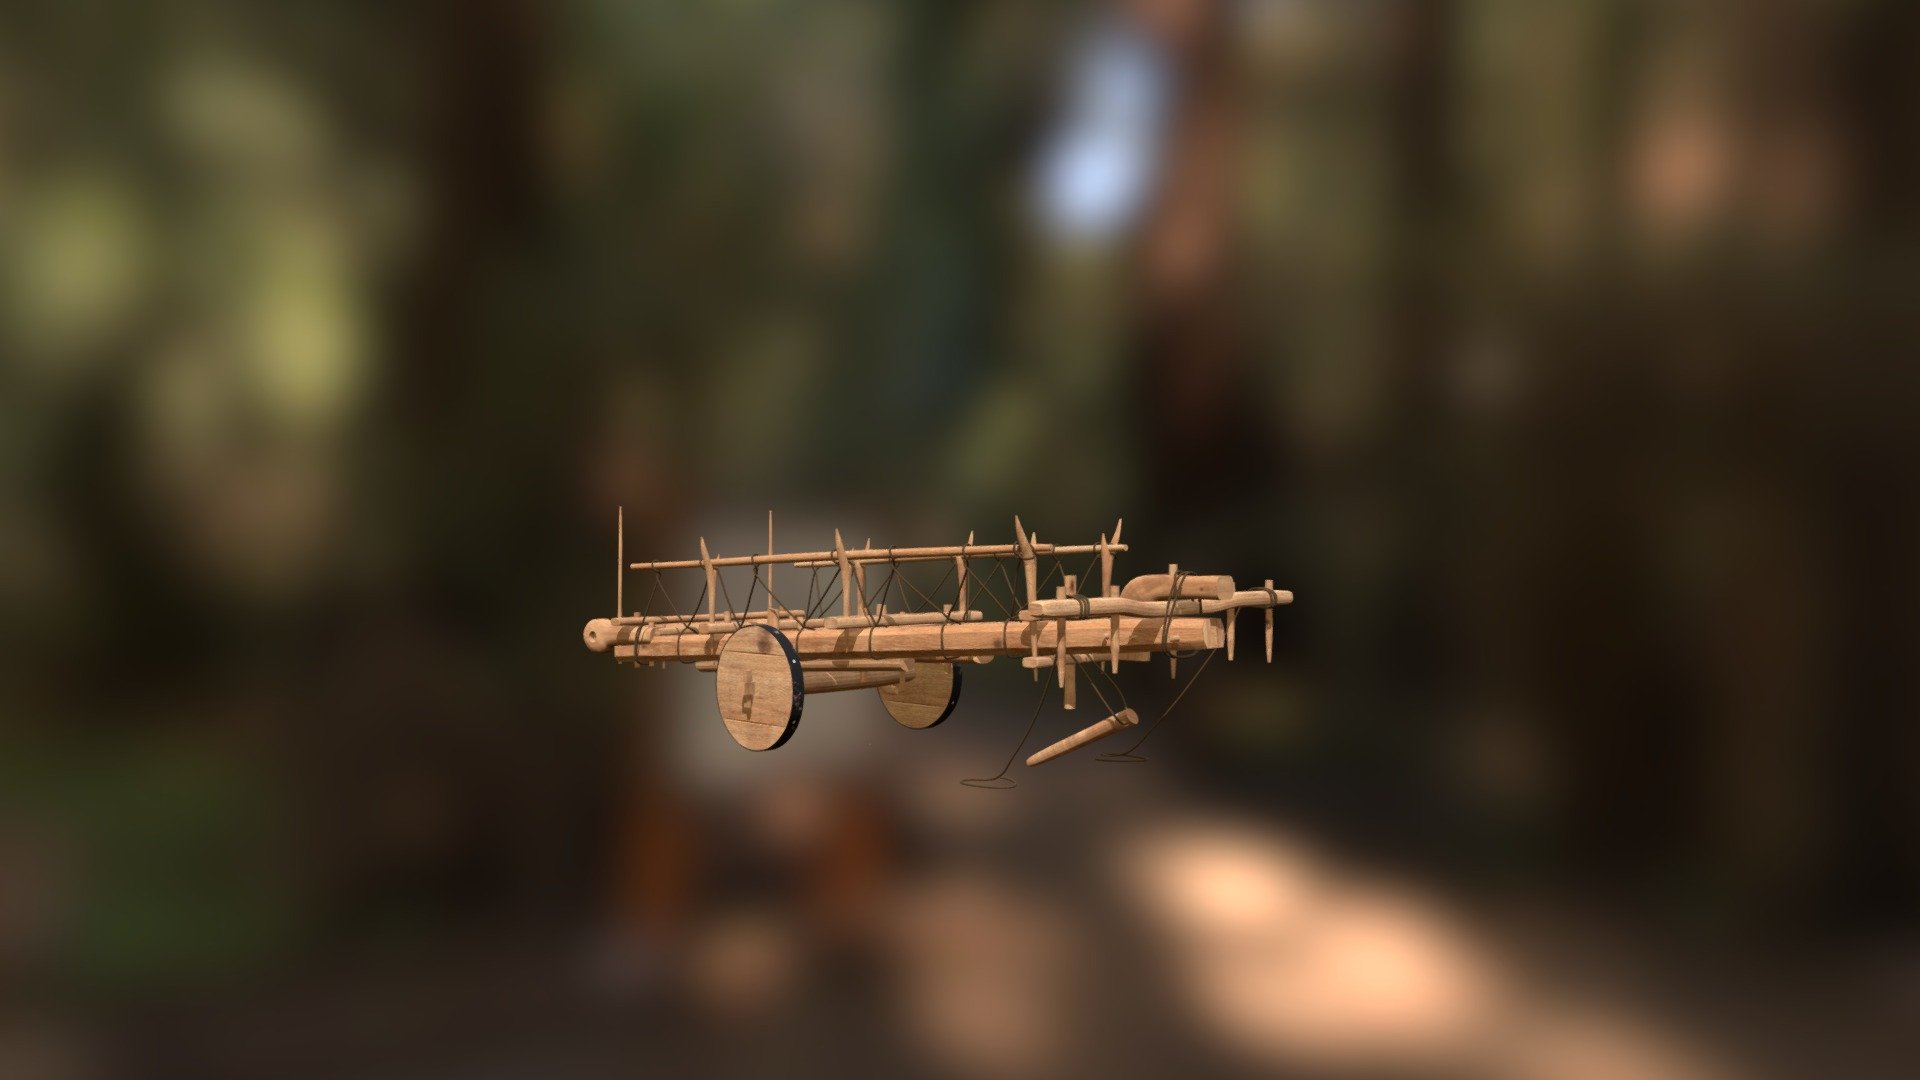 Used by Circassians in old times, this wagon had the ability to carry heavy items in rough terrain.

For more Informations, Please visit my Website:
https://aofordesign.de/ - Circassian Wooden Wagon - 3D model by Ayal Othman (@aofordesign) 3d model